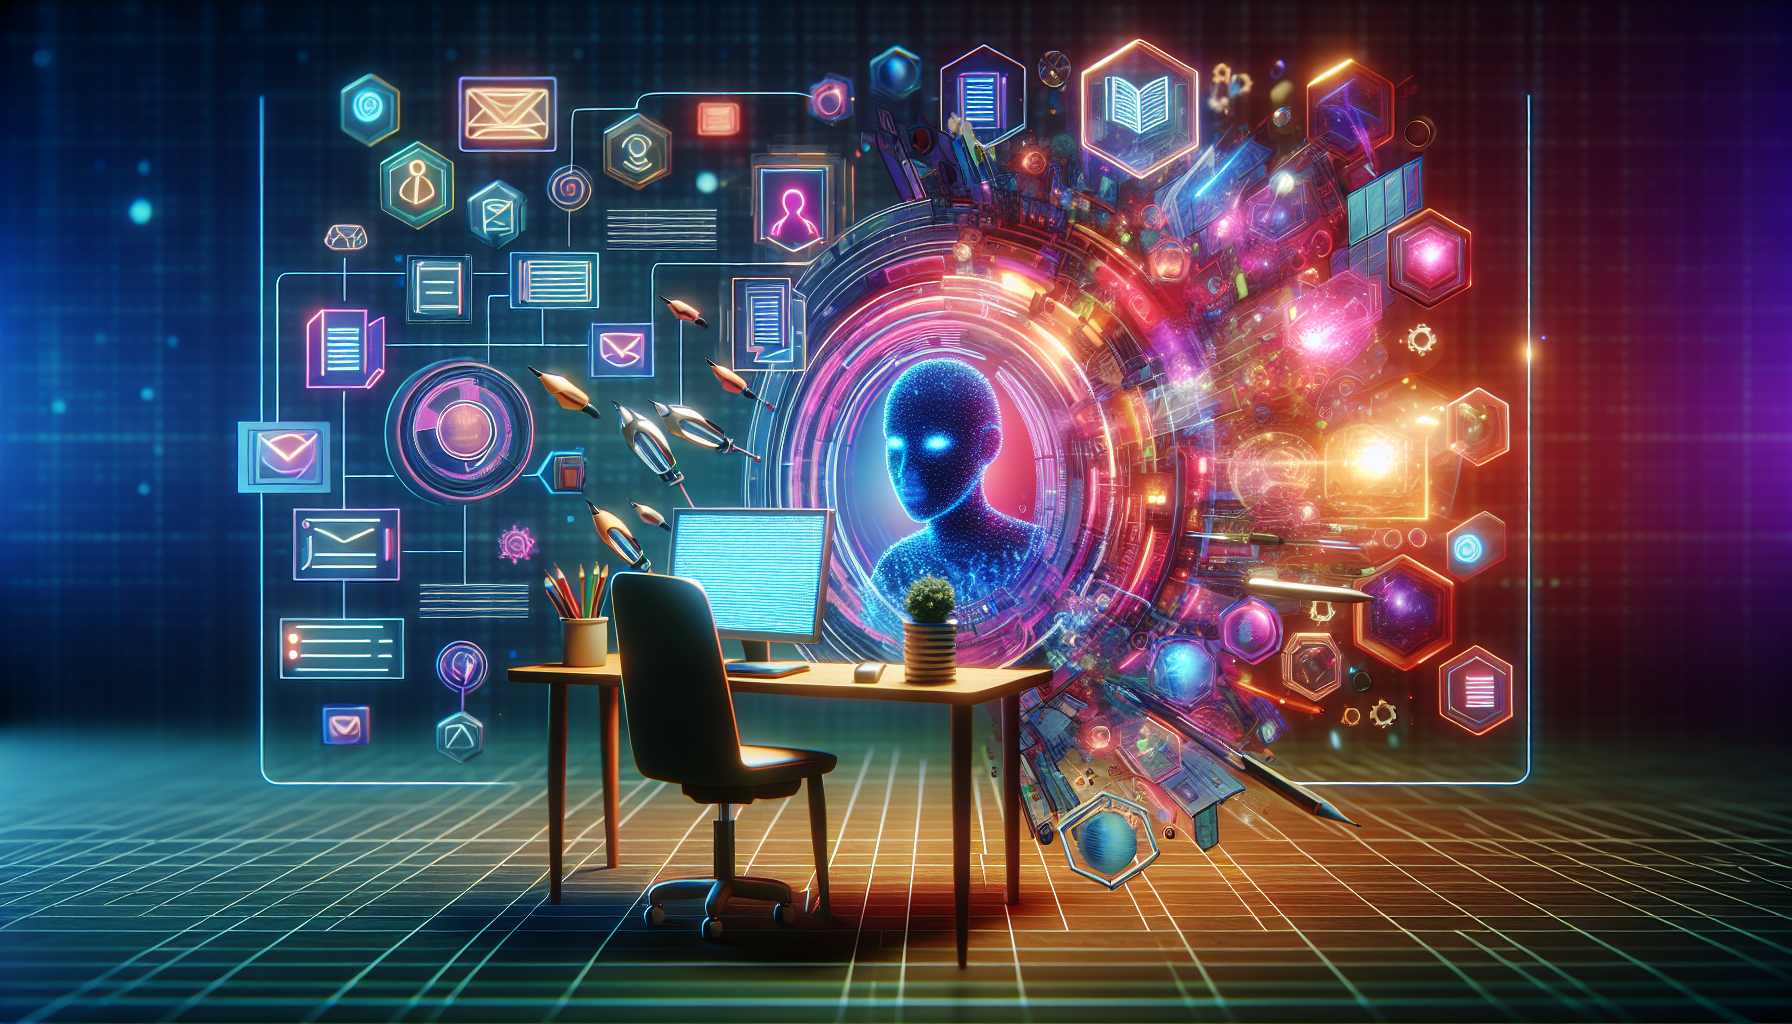 A vibrant and modern illustration showing a futuristic setting where artificial intelligence plays a major role in scriptwriting. Depict a computer or an AI device at a desk, surrounded by floating holographic screens displaying abstract concepts of scriptwriting, storytelling elements like character arcs, plotlines and dialogues. Emphasize the blending of technology and the creative process in this exploration of future scriptwriting.